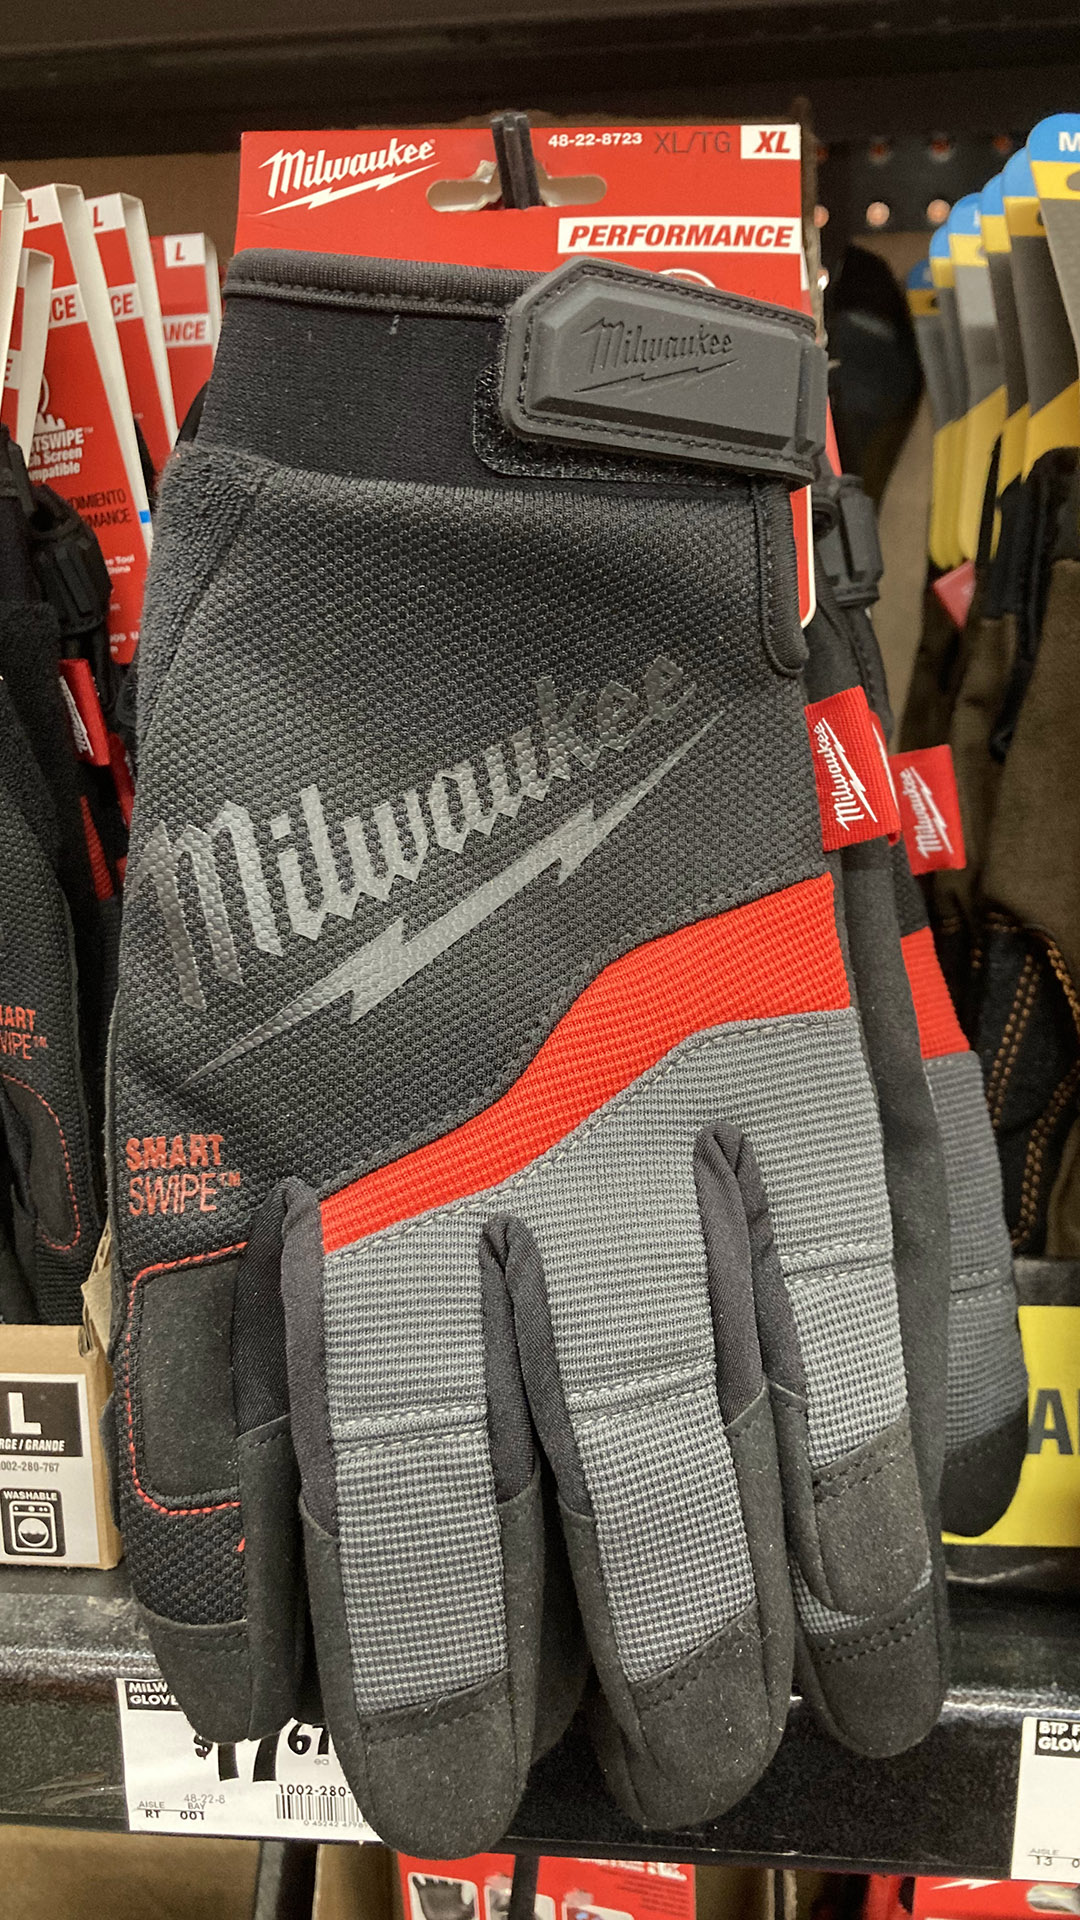 Work gloves in the XL size and with Velcro wrist-fasteners are arranged on hangers on a shelf, with its price on a sticker below.